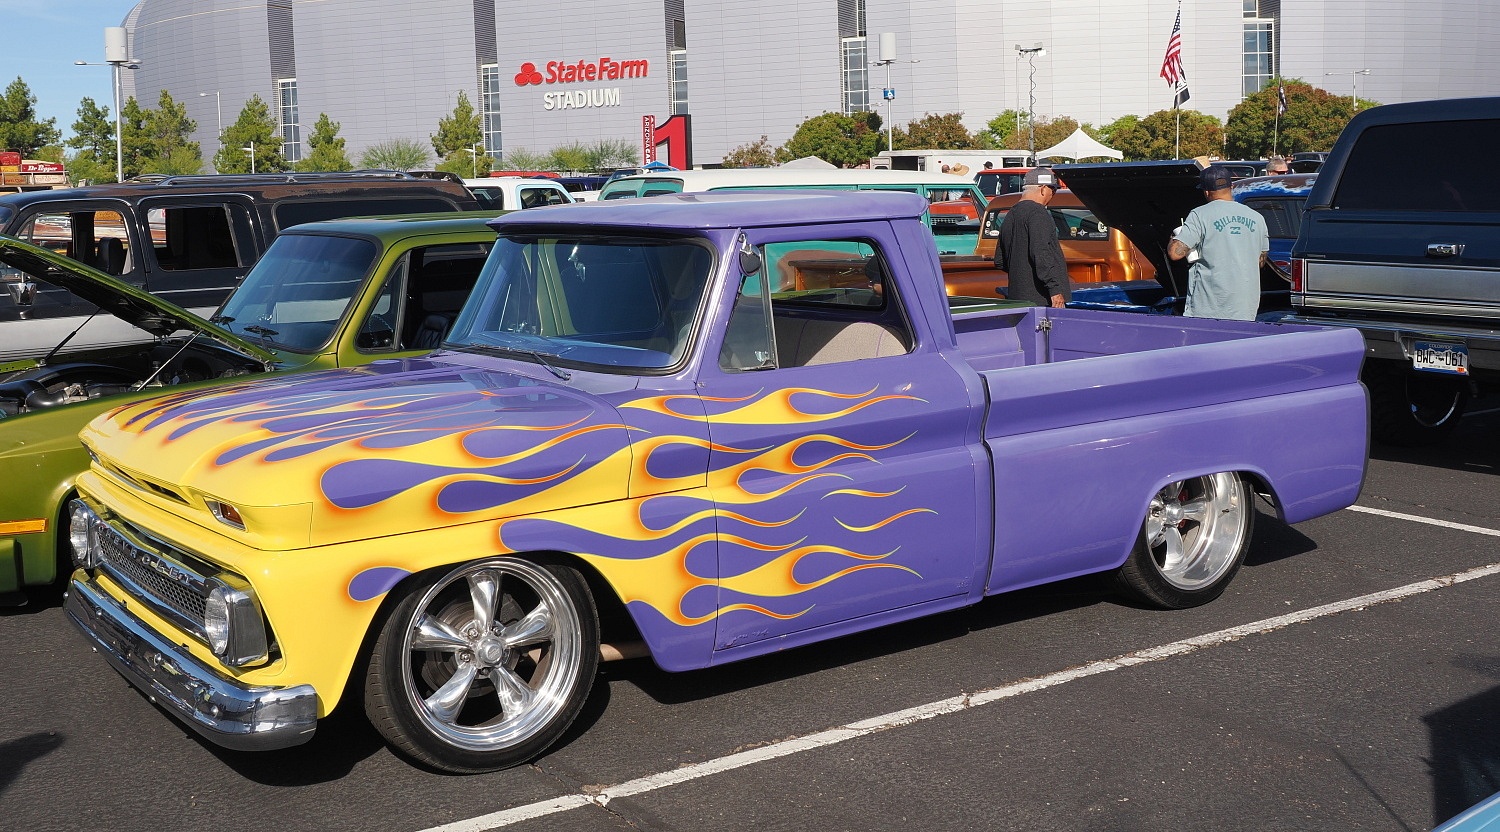 Purple Chevy truck with yellow flames in State Farm Stadium parking lot.